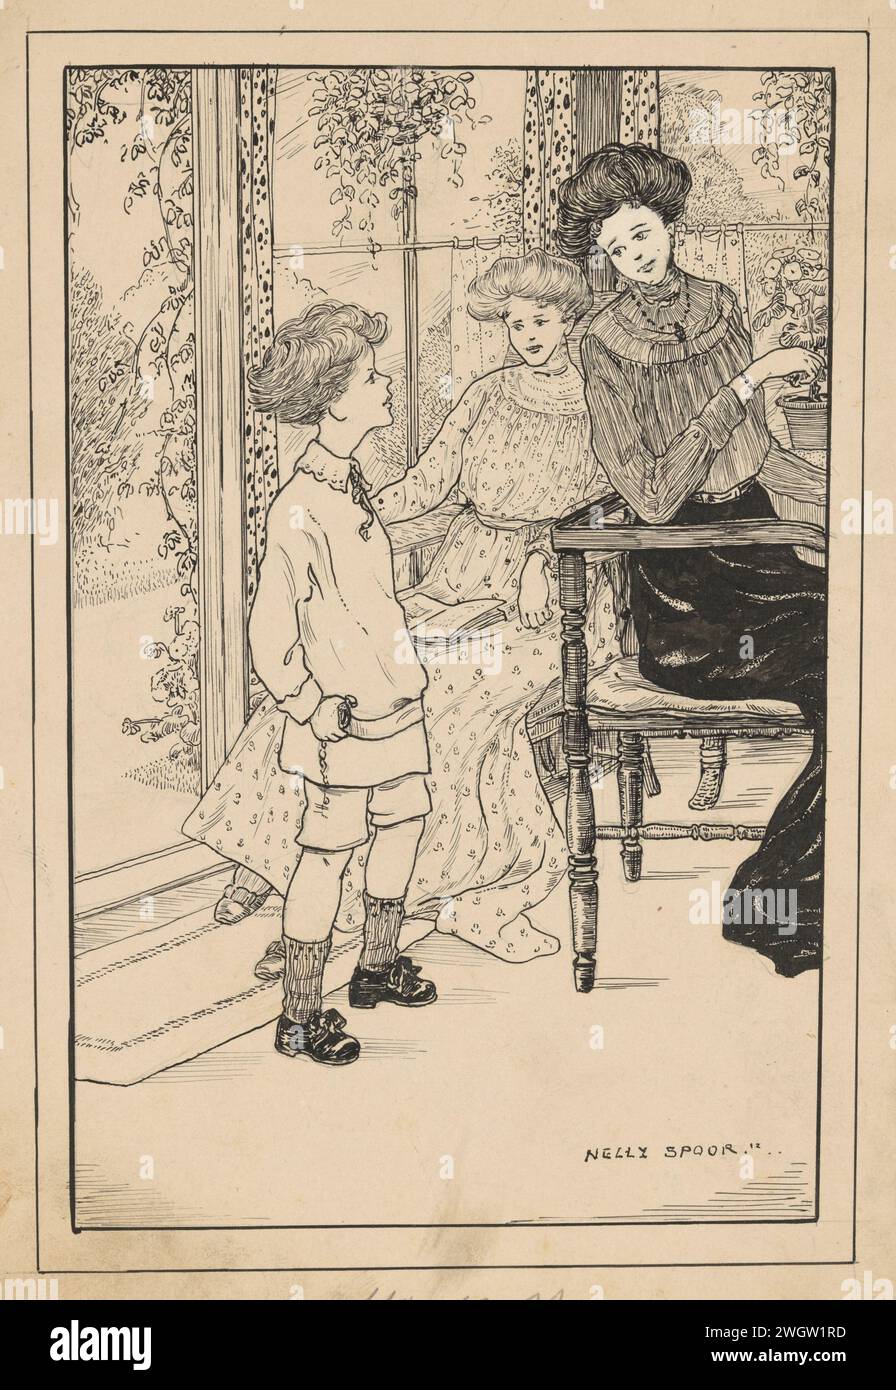 Two women and a boy in a conservatory, 1912 drawing A woman sits at a table in a conservatory. A second woman is sitting on your lap with a book. The women look at a boy who came in through the open door. He has a pouch in his hand.  cardboard. paper. India ink (ink). pencil pen sun-porch, sun-parlour, glazed verandah. sitting figure - AA - female human figure. boy (child between toddler and youth) Stock Photo